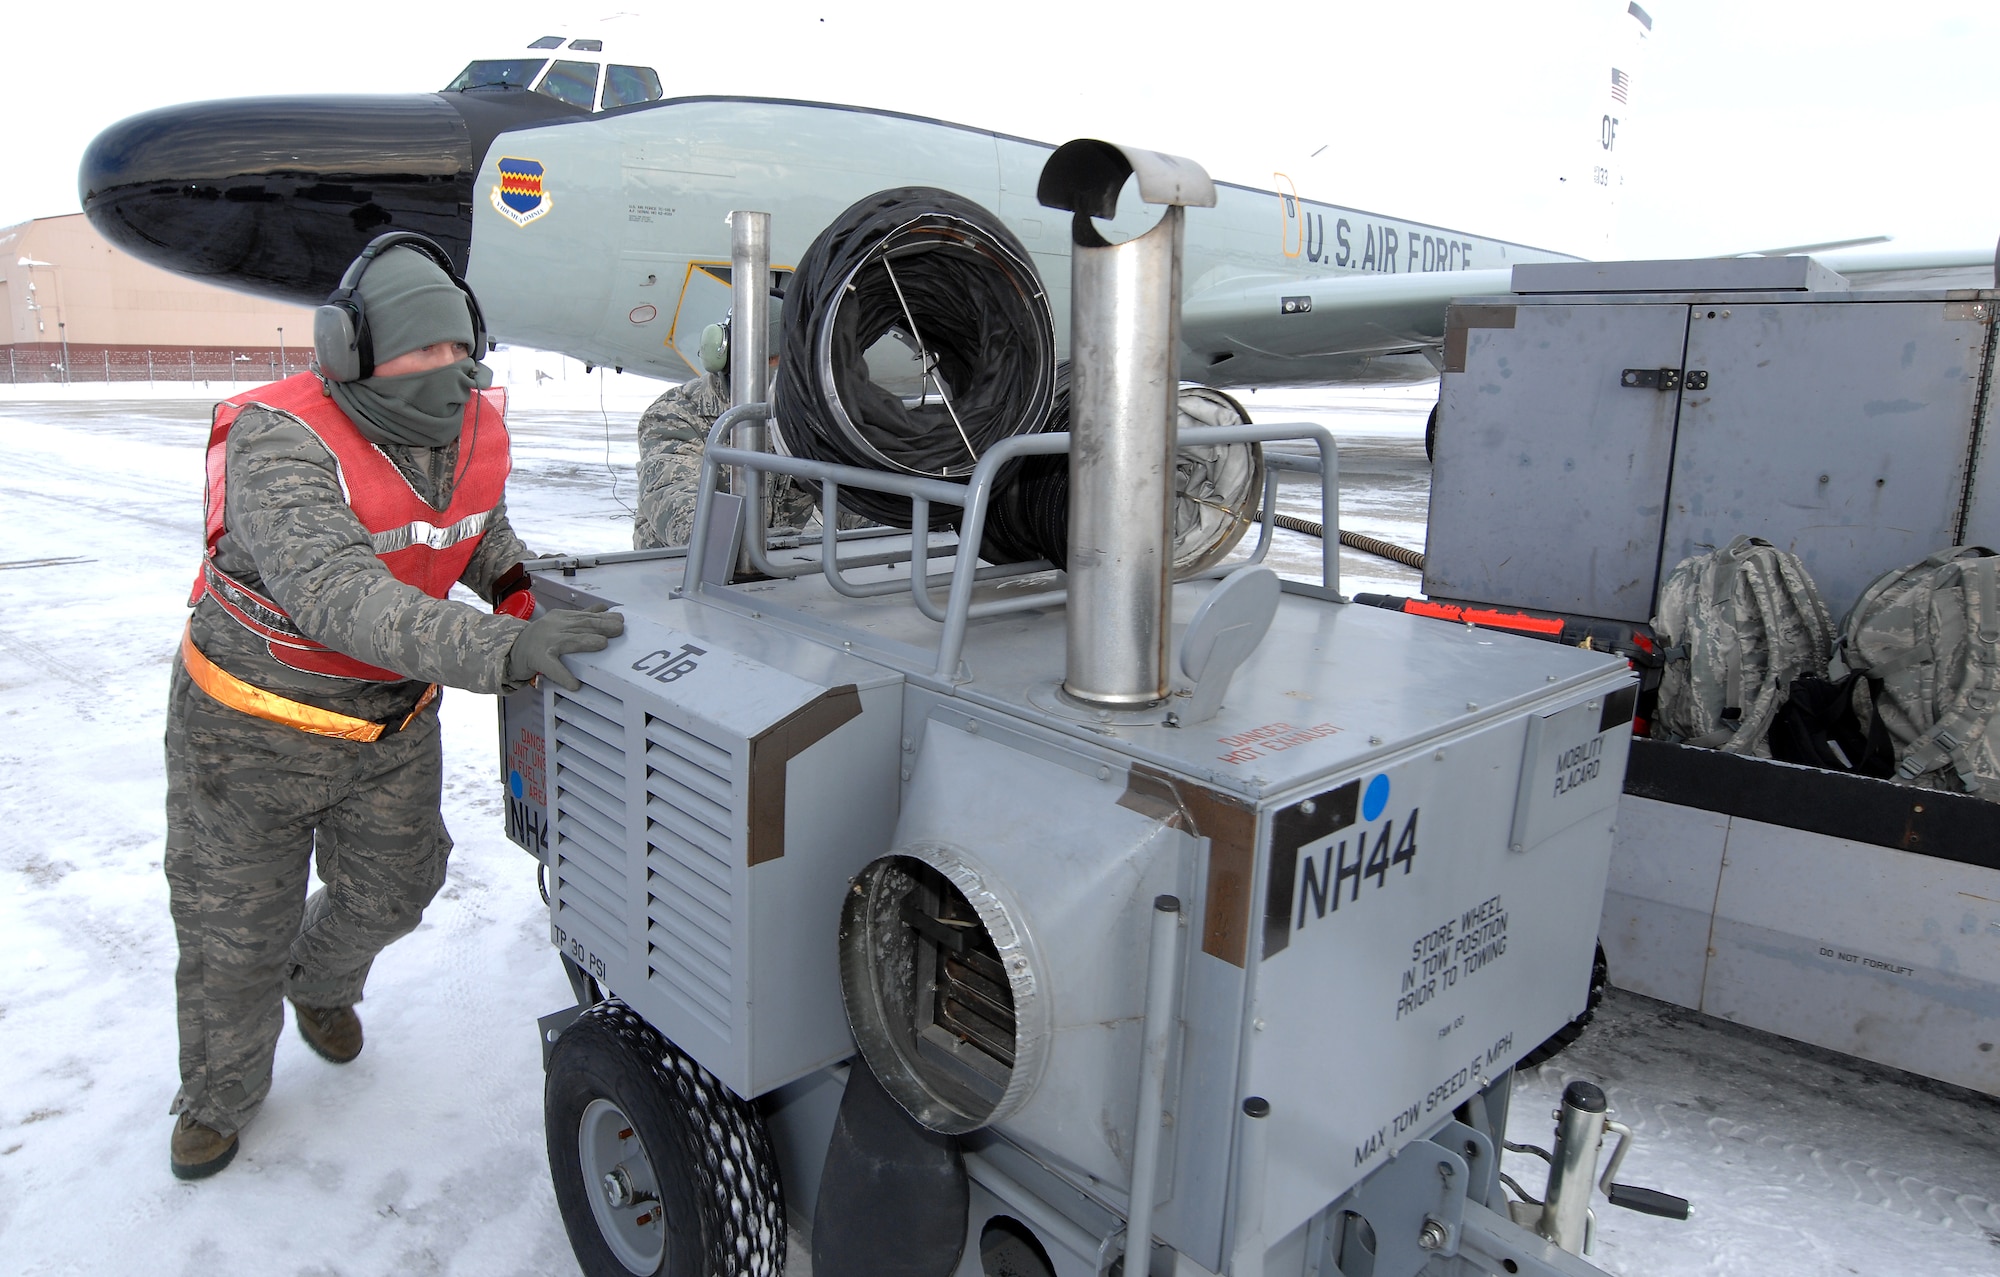 U.S. Air Force Senior Airman Jacob Bryson and another airman push a heater cart out of the path of an RC-135 Rivet Joint while preparing the aircraft for launch Feb. 3 at Offutt Air Force Base Neb. Additional maintenance time is typically needed during winter operations to heat aircraft and to remove snow and ice from the aircraft prior to take-off.   Bryson is a crew chief assigned to the 83rd Aircraft Maintenance Unit, 55 Aircraft Maintenance Squadron. (U.S. Air Force photo by Delanie Stafford/Released)